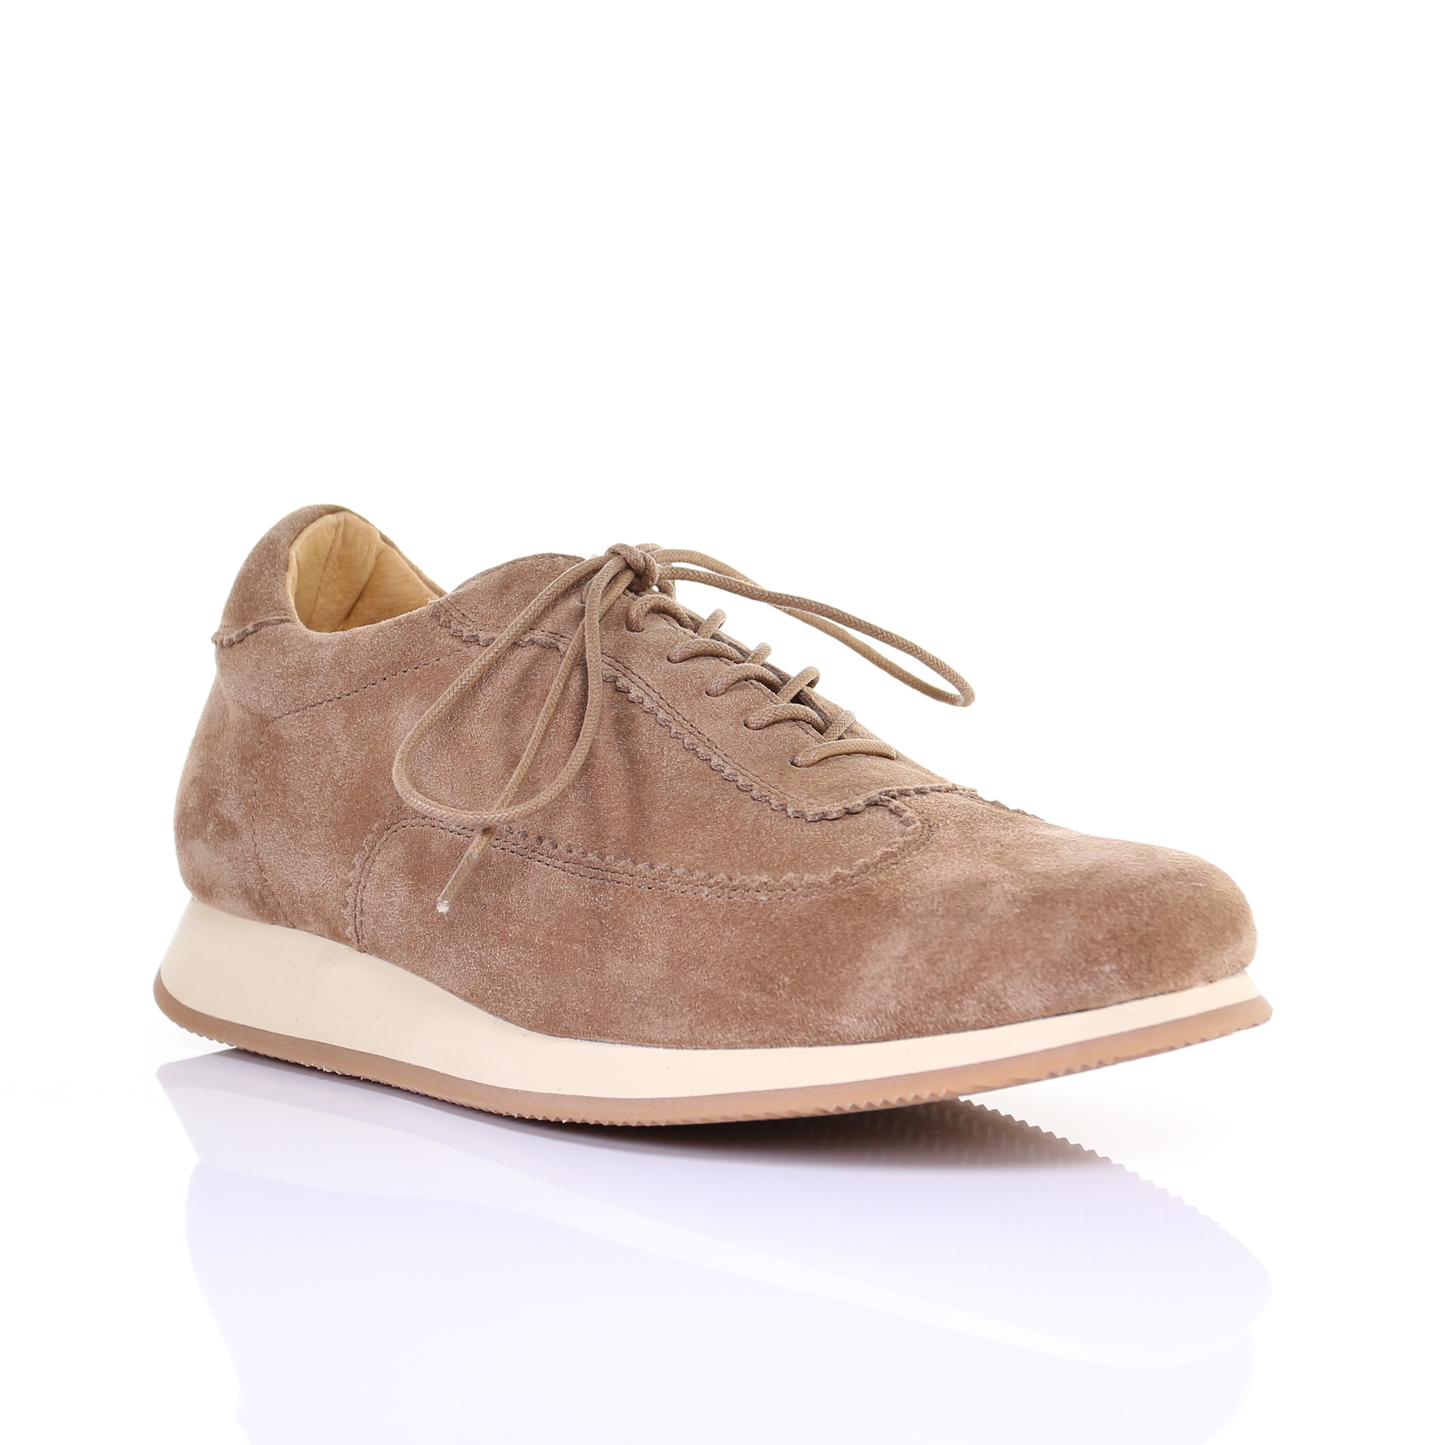 Men's Style Lace Up Suede Leather Casual Shoes (Beige)